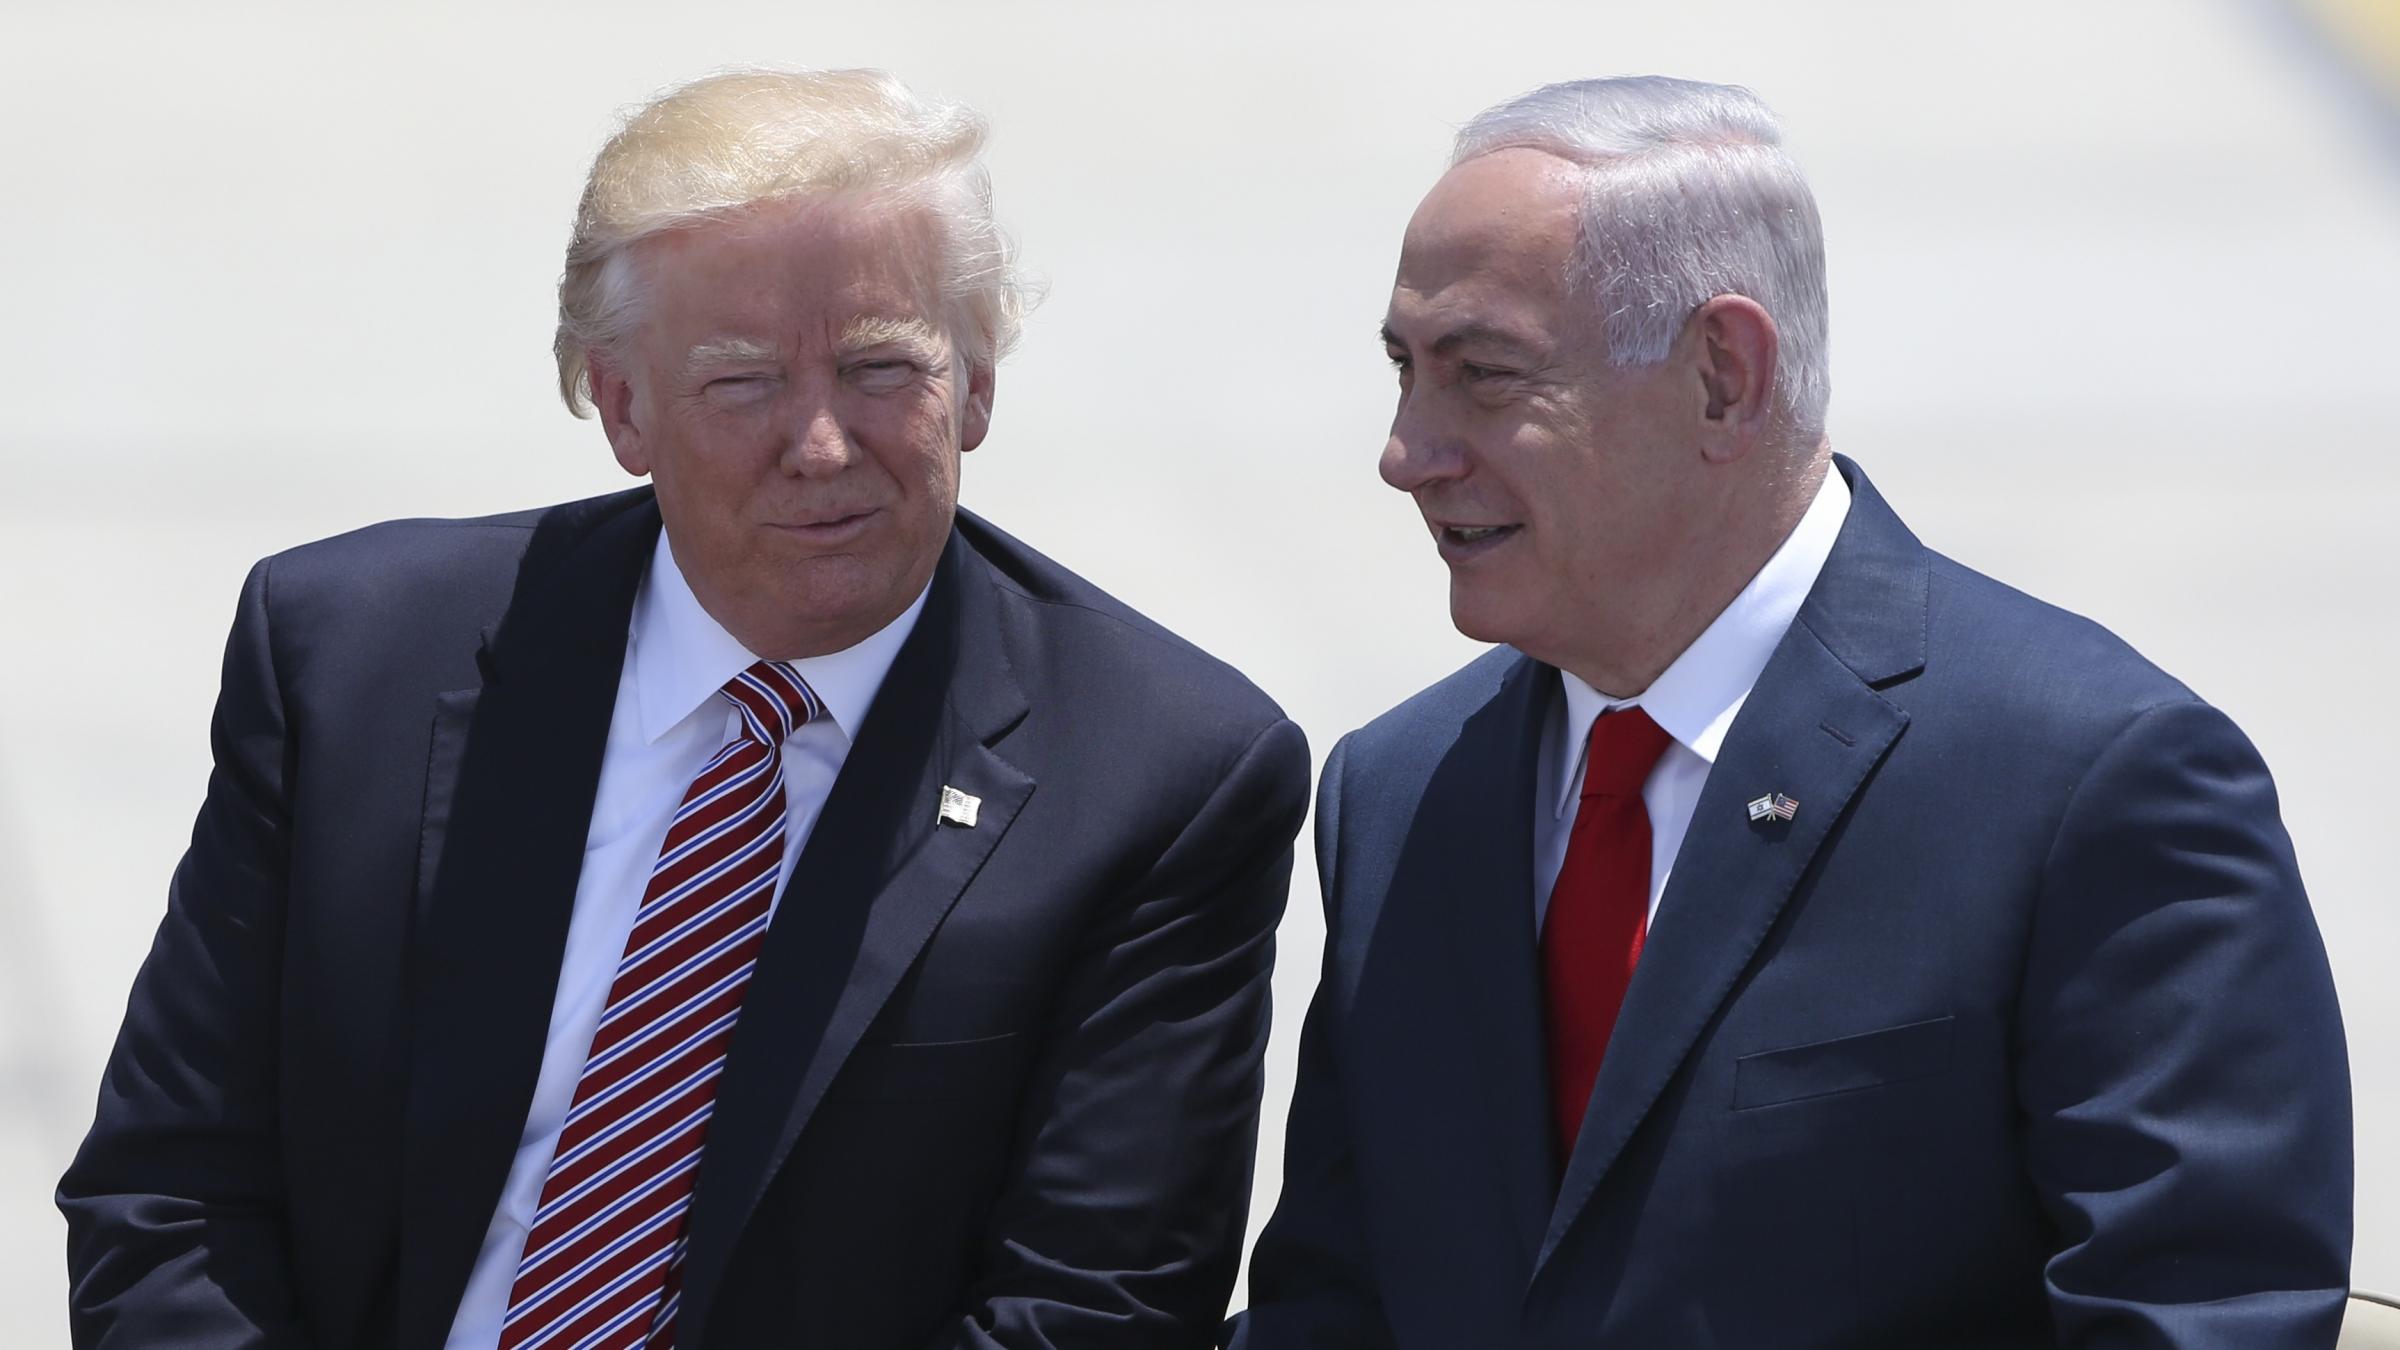 Trump: I did not mention Israel to Russian diplomats - Wiltshire Times